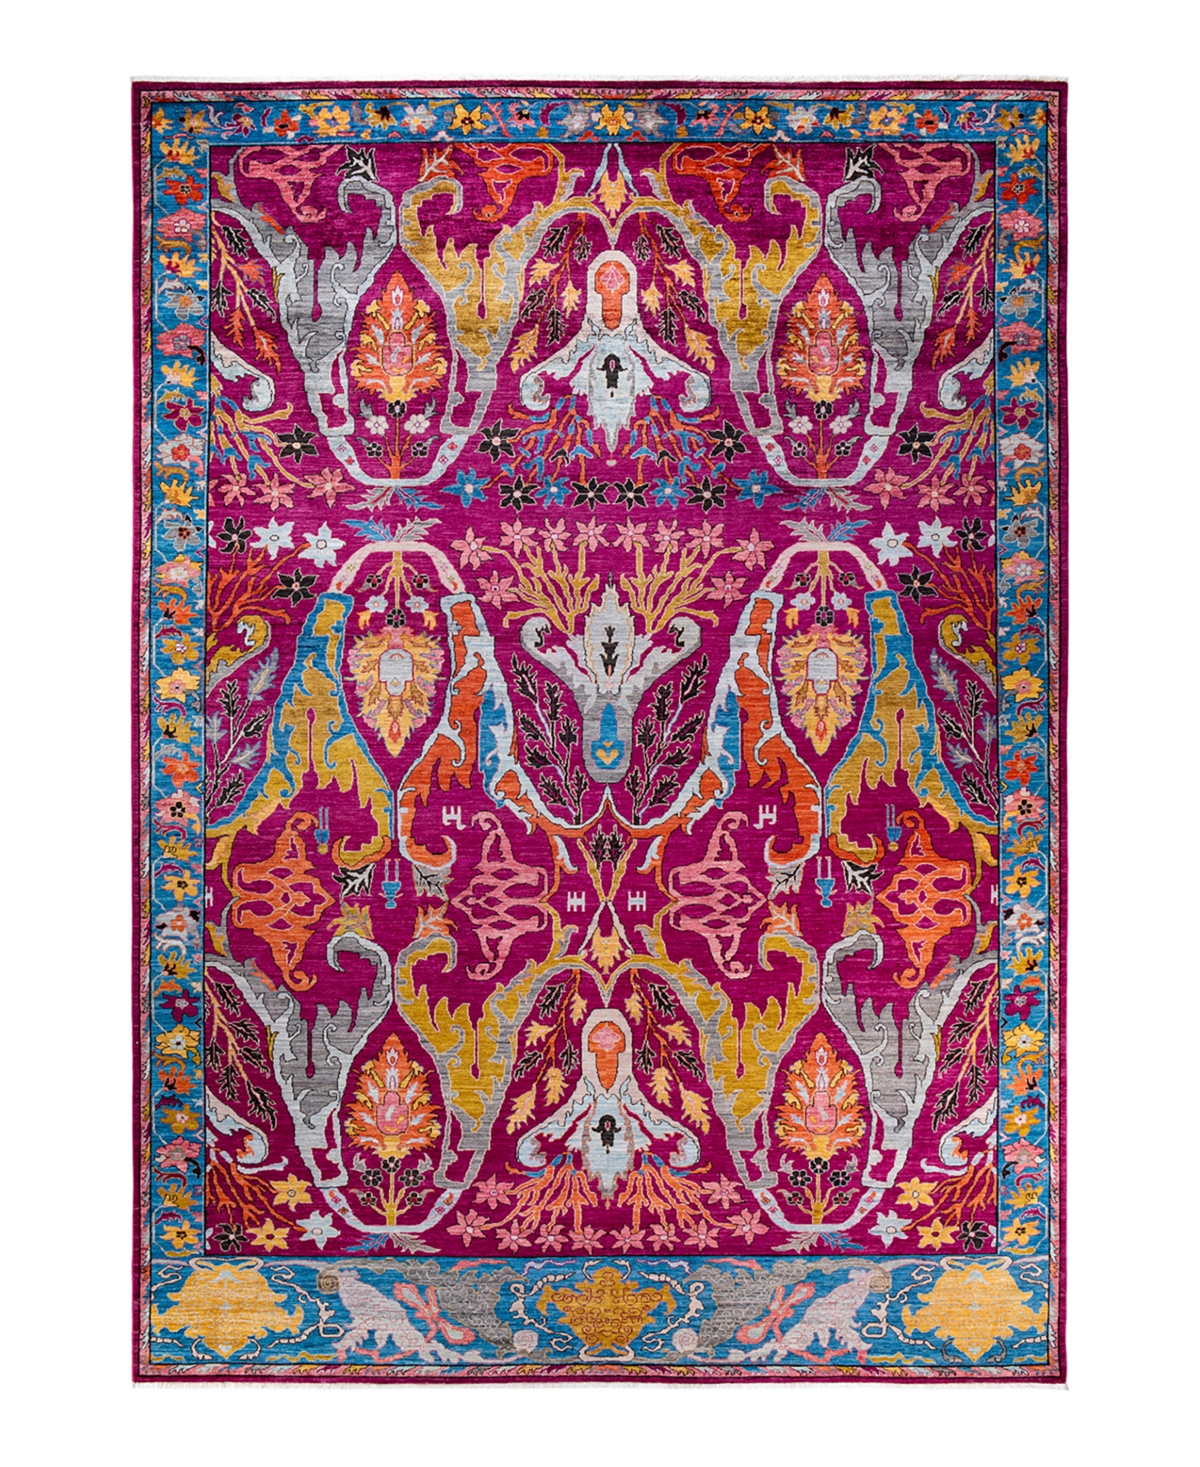 Adorn Hand Woven Rugs Serapi M1973 9'11in x 14' Area Rug - Pink